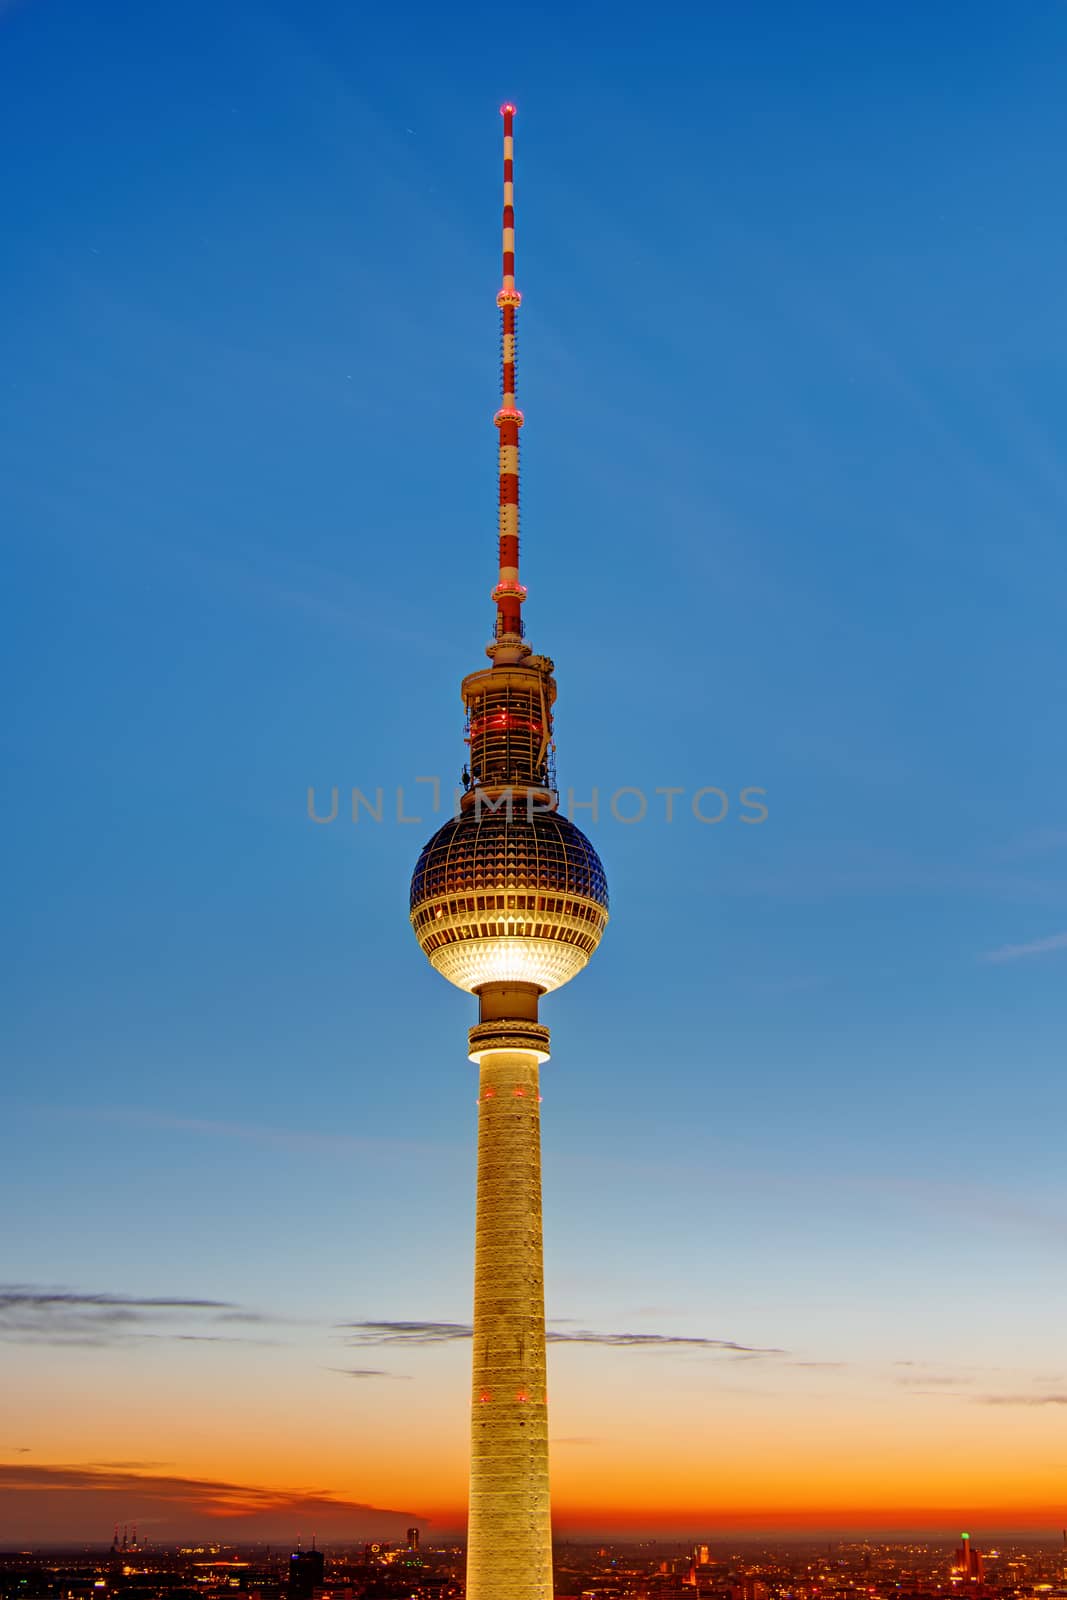 The famous TV Tower in Berlin at sunset